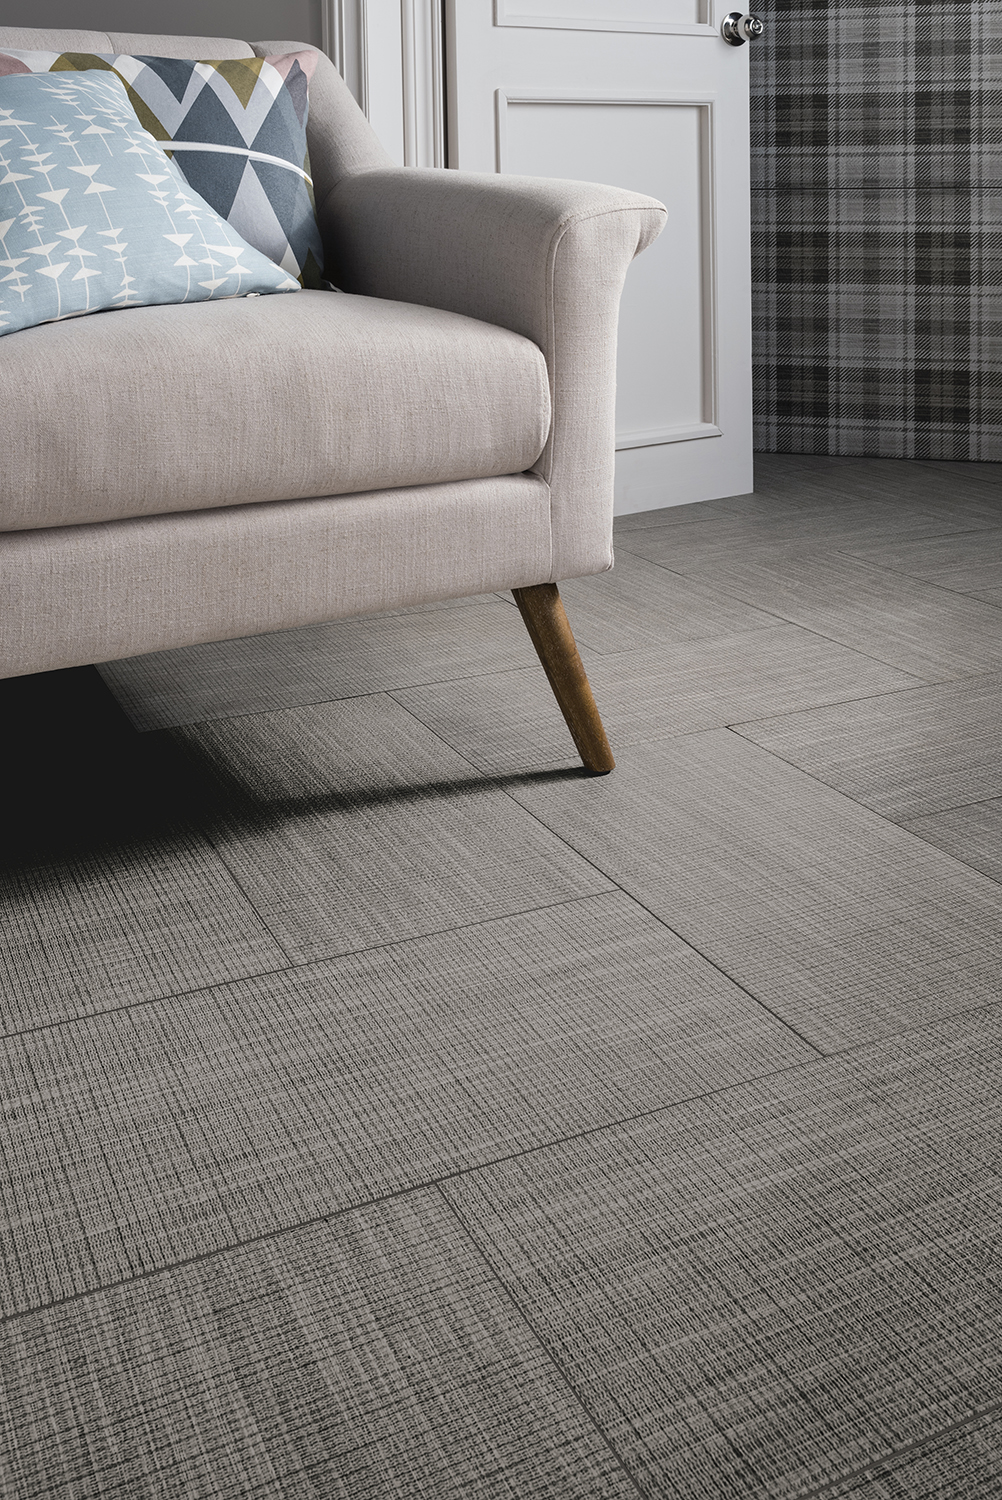 Fabrix by Topps Tiles